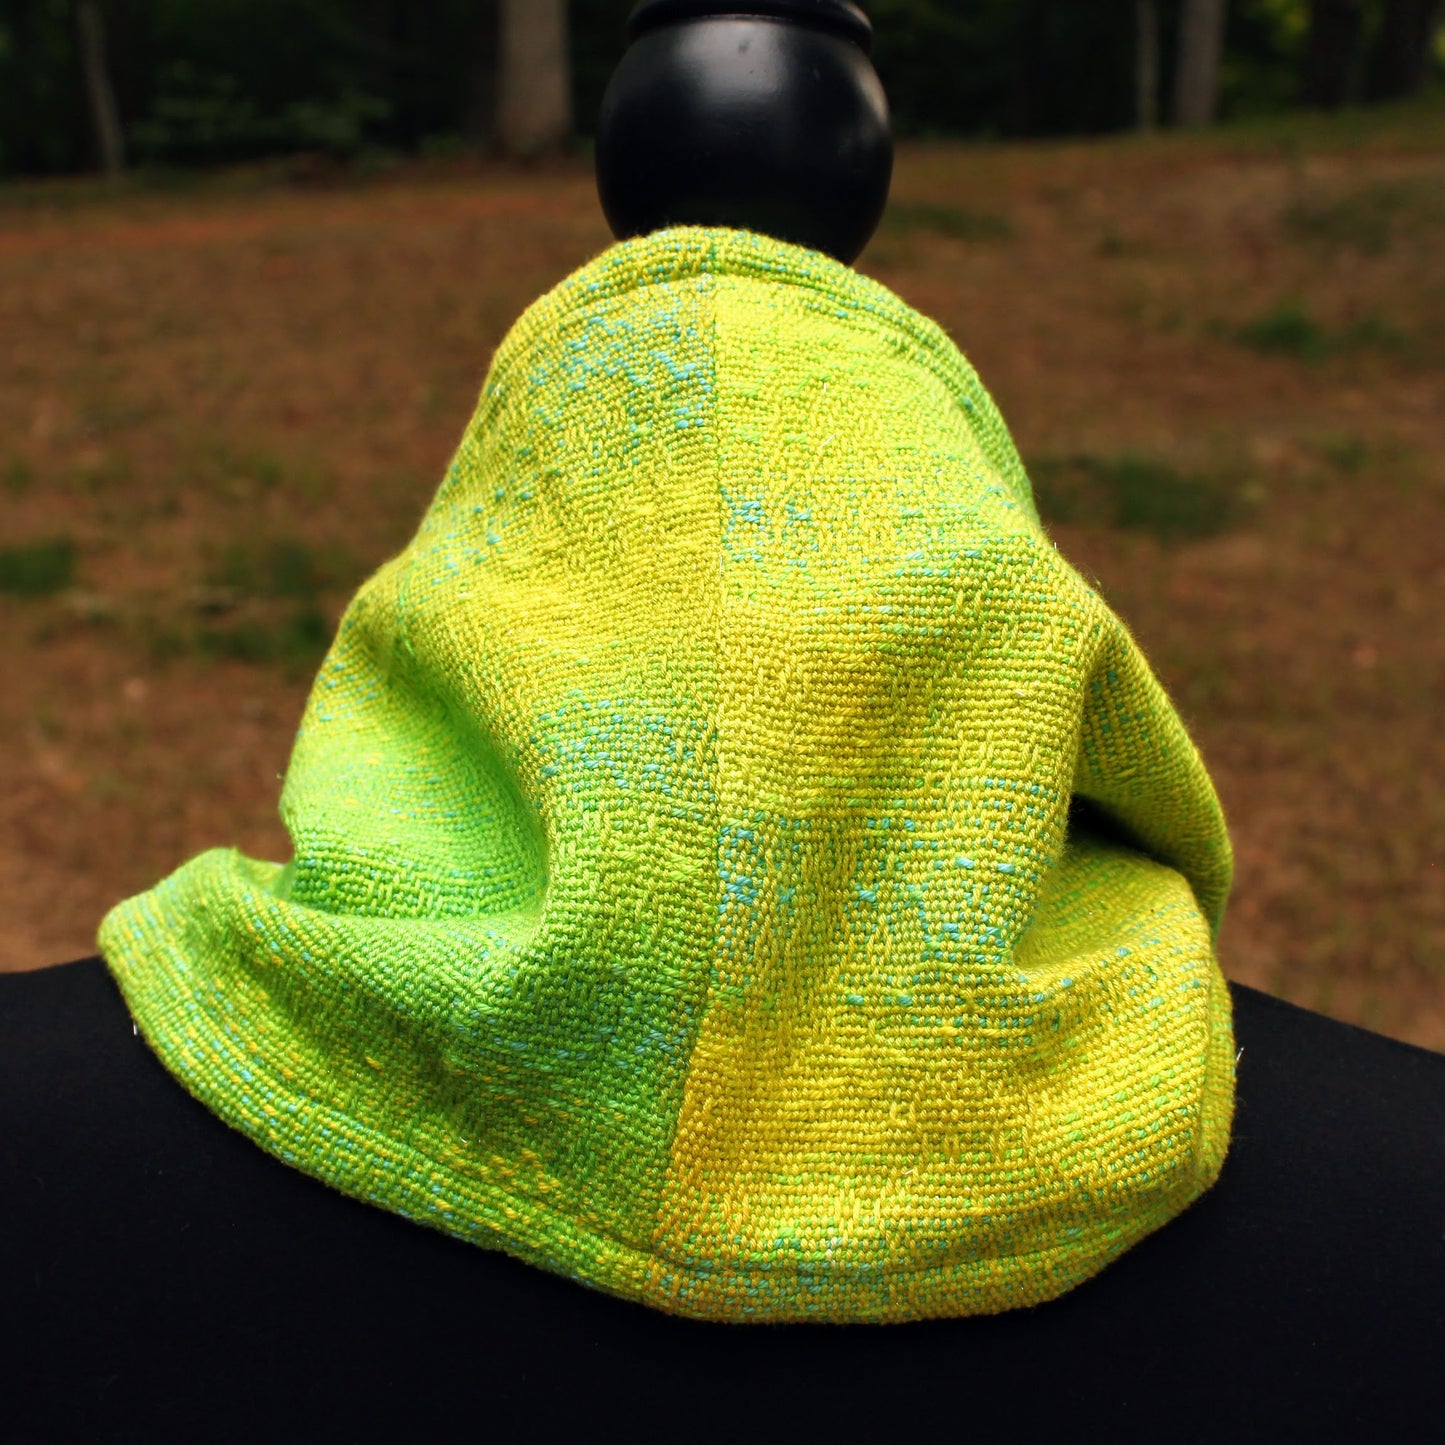 Handwoven Mini Cowl - Get Off My Lawn! - Ready to ship!